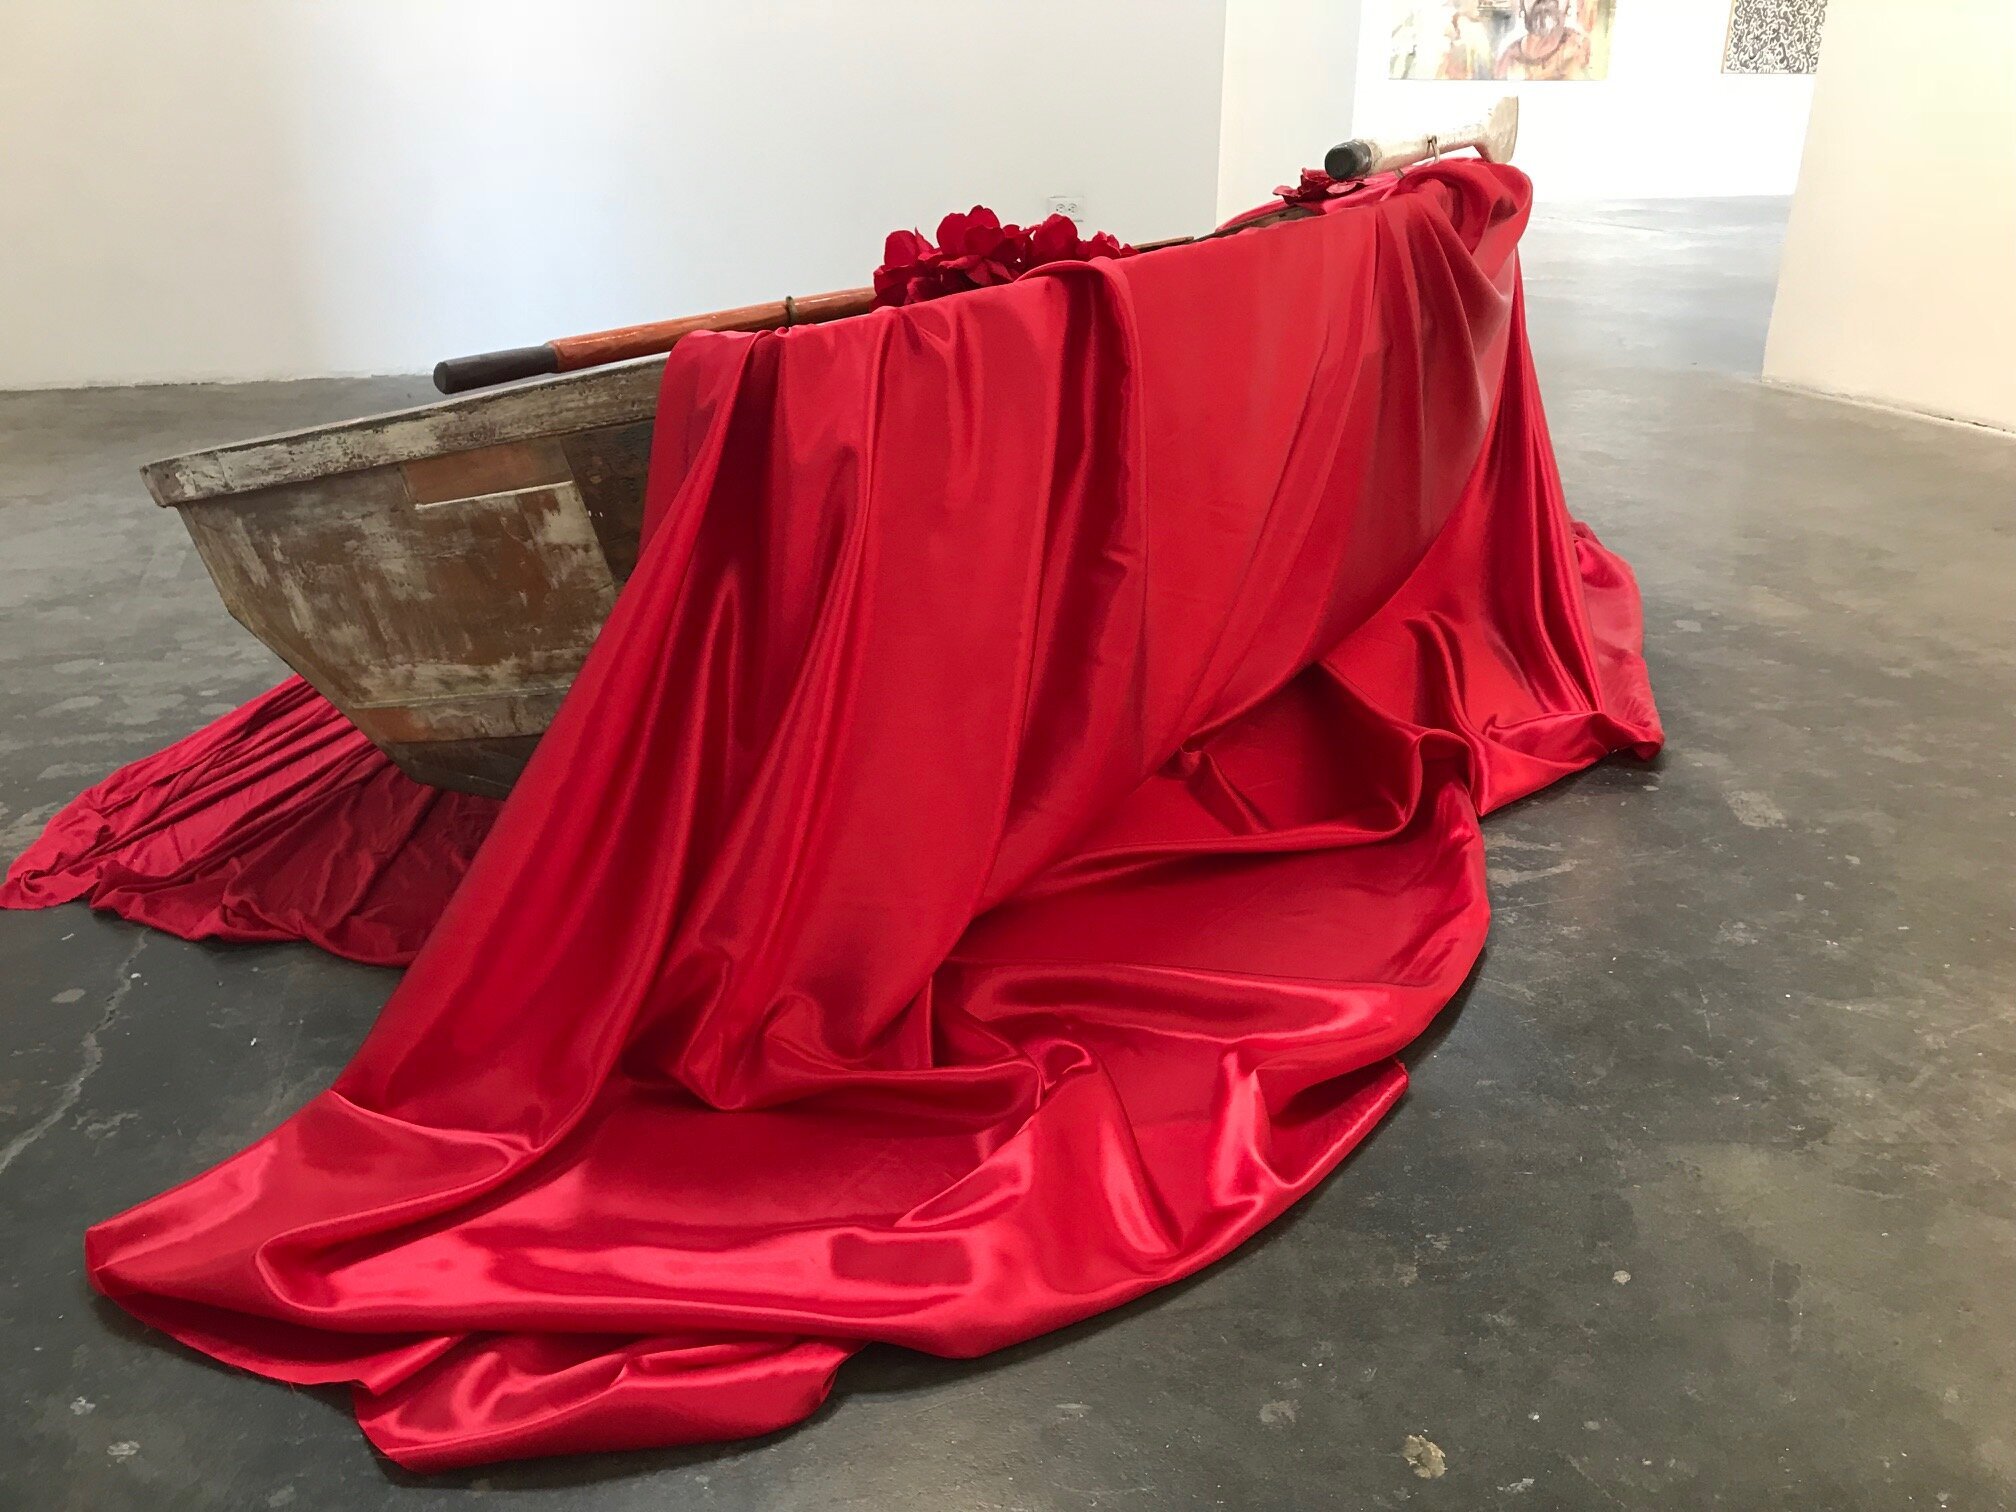 Luigia+Martelloni+Sea+of+Promises+2018+boat,+red+fabic,+roses+and+mix+media,+site+specific+installation.jpg